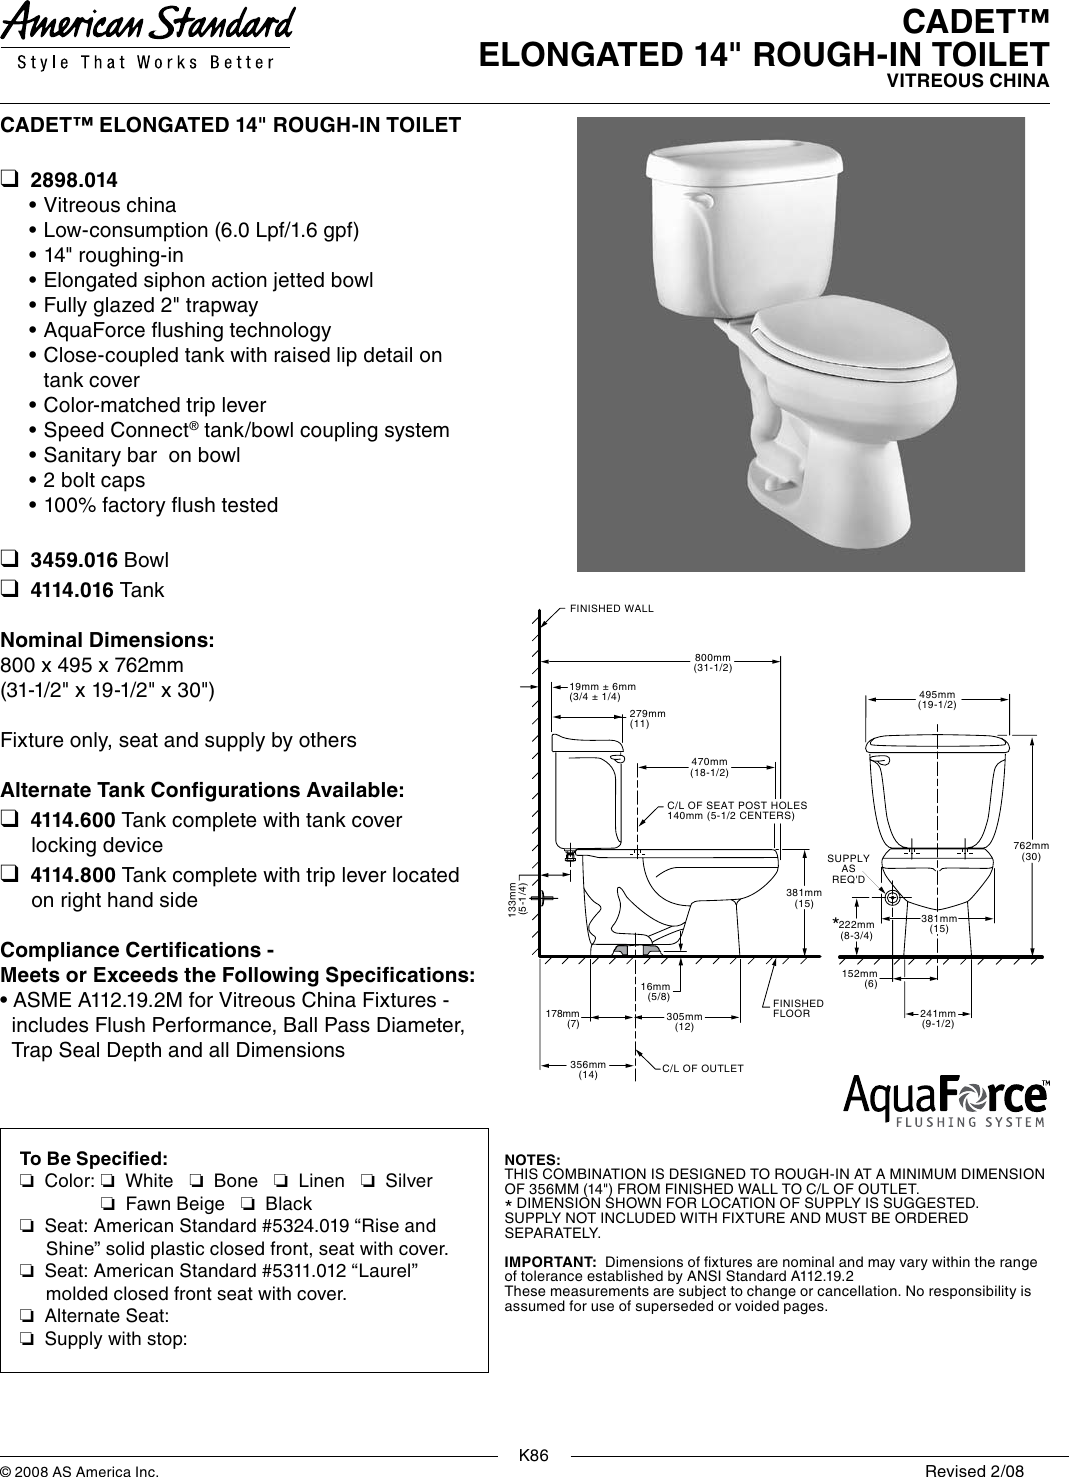 Page 1 of 1 - American-Standard American-Standard-Cadet-Elongated-14-Rough-In-Toilet-2898-014-Users-Manual-  American-standard-cadet-elongated-14-rough-in-toilet-2898-014-users-manual